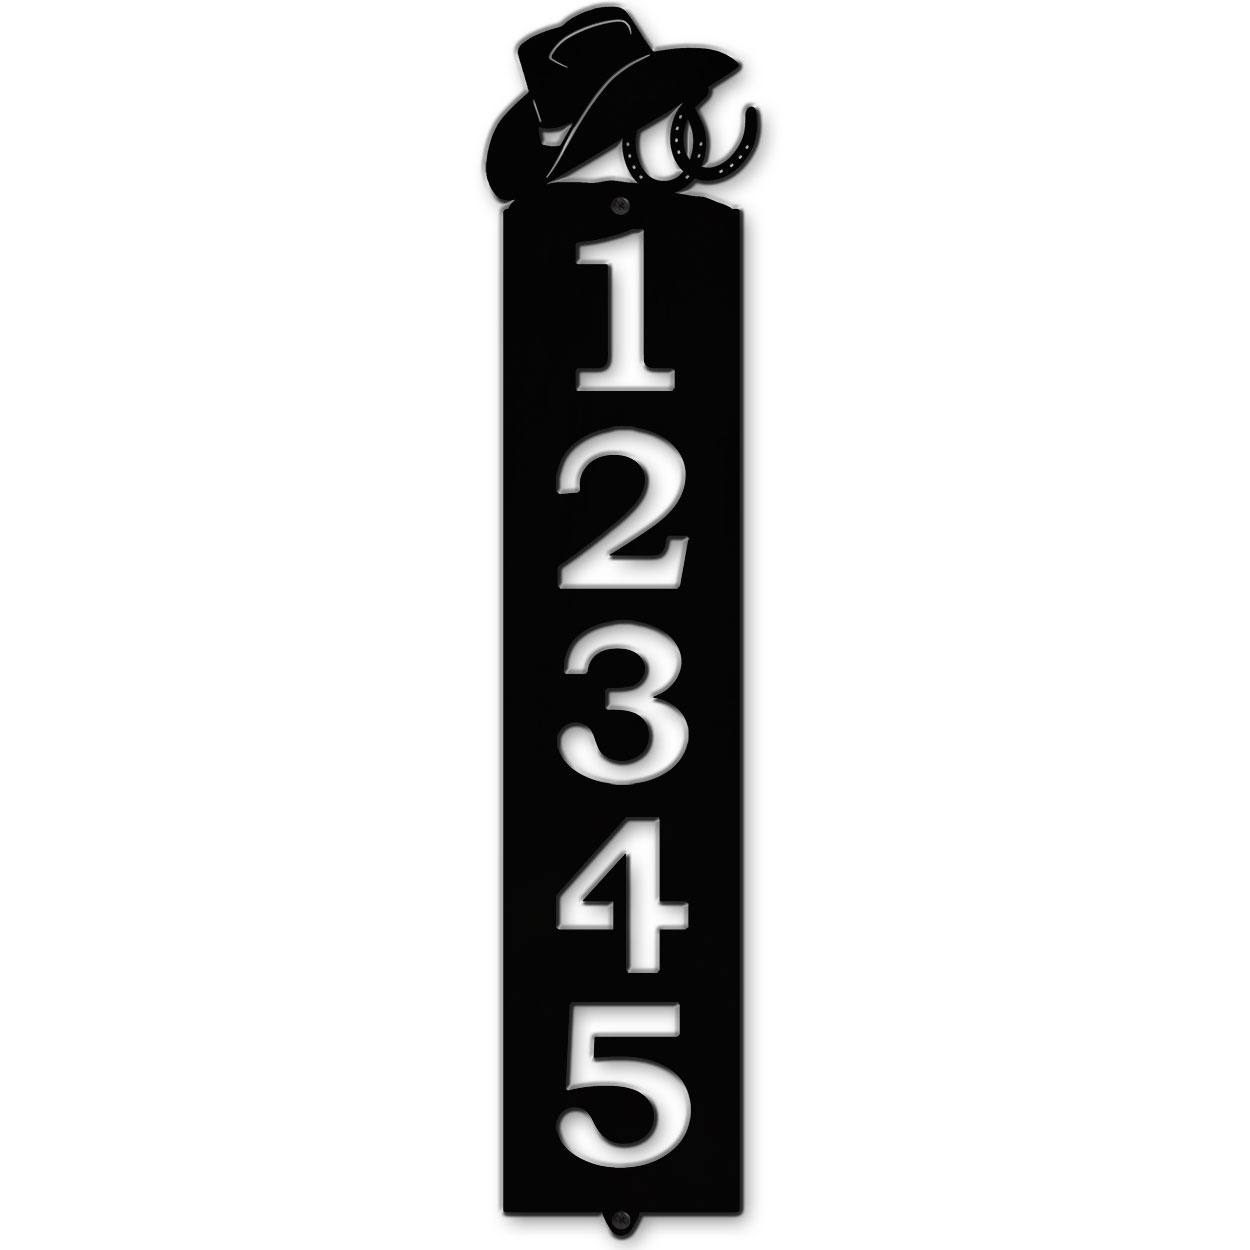 635335 - Hat n Horseshoes Cut Outs Five Digit Address Number Plaque